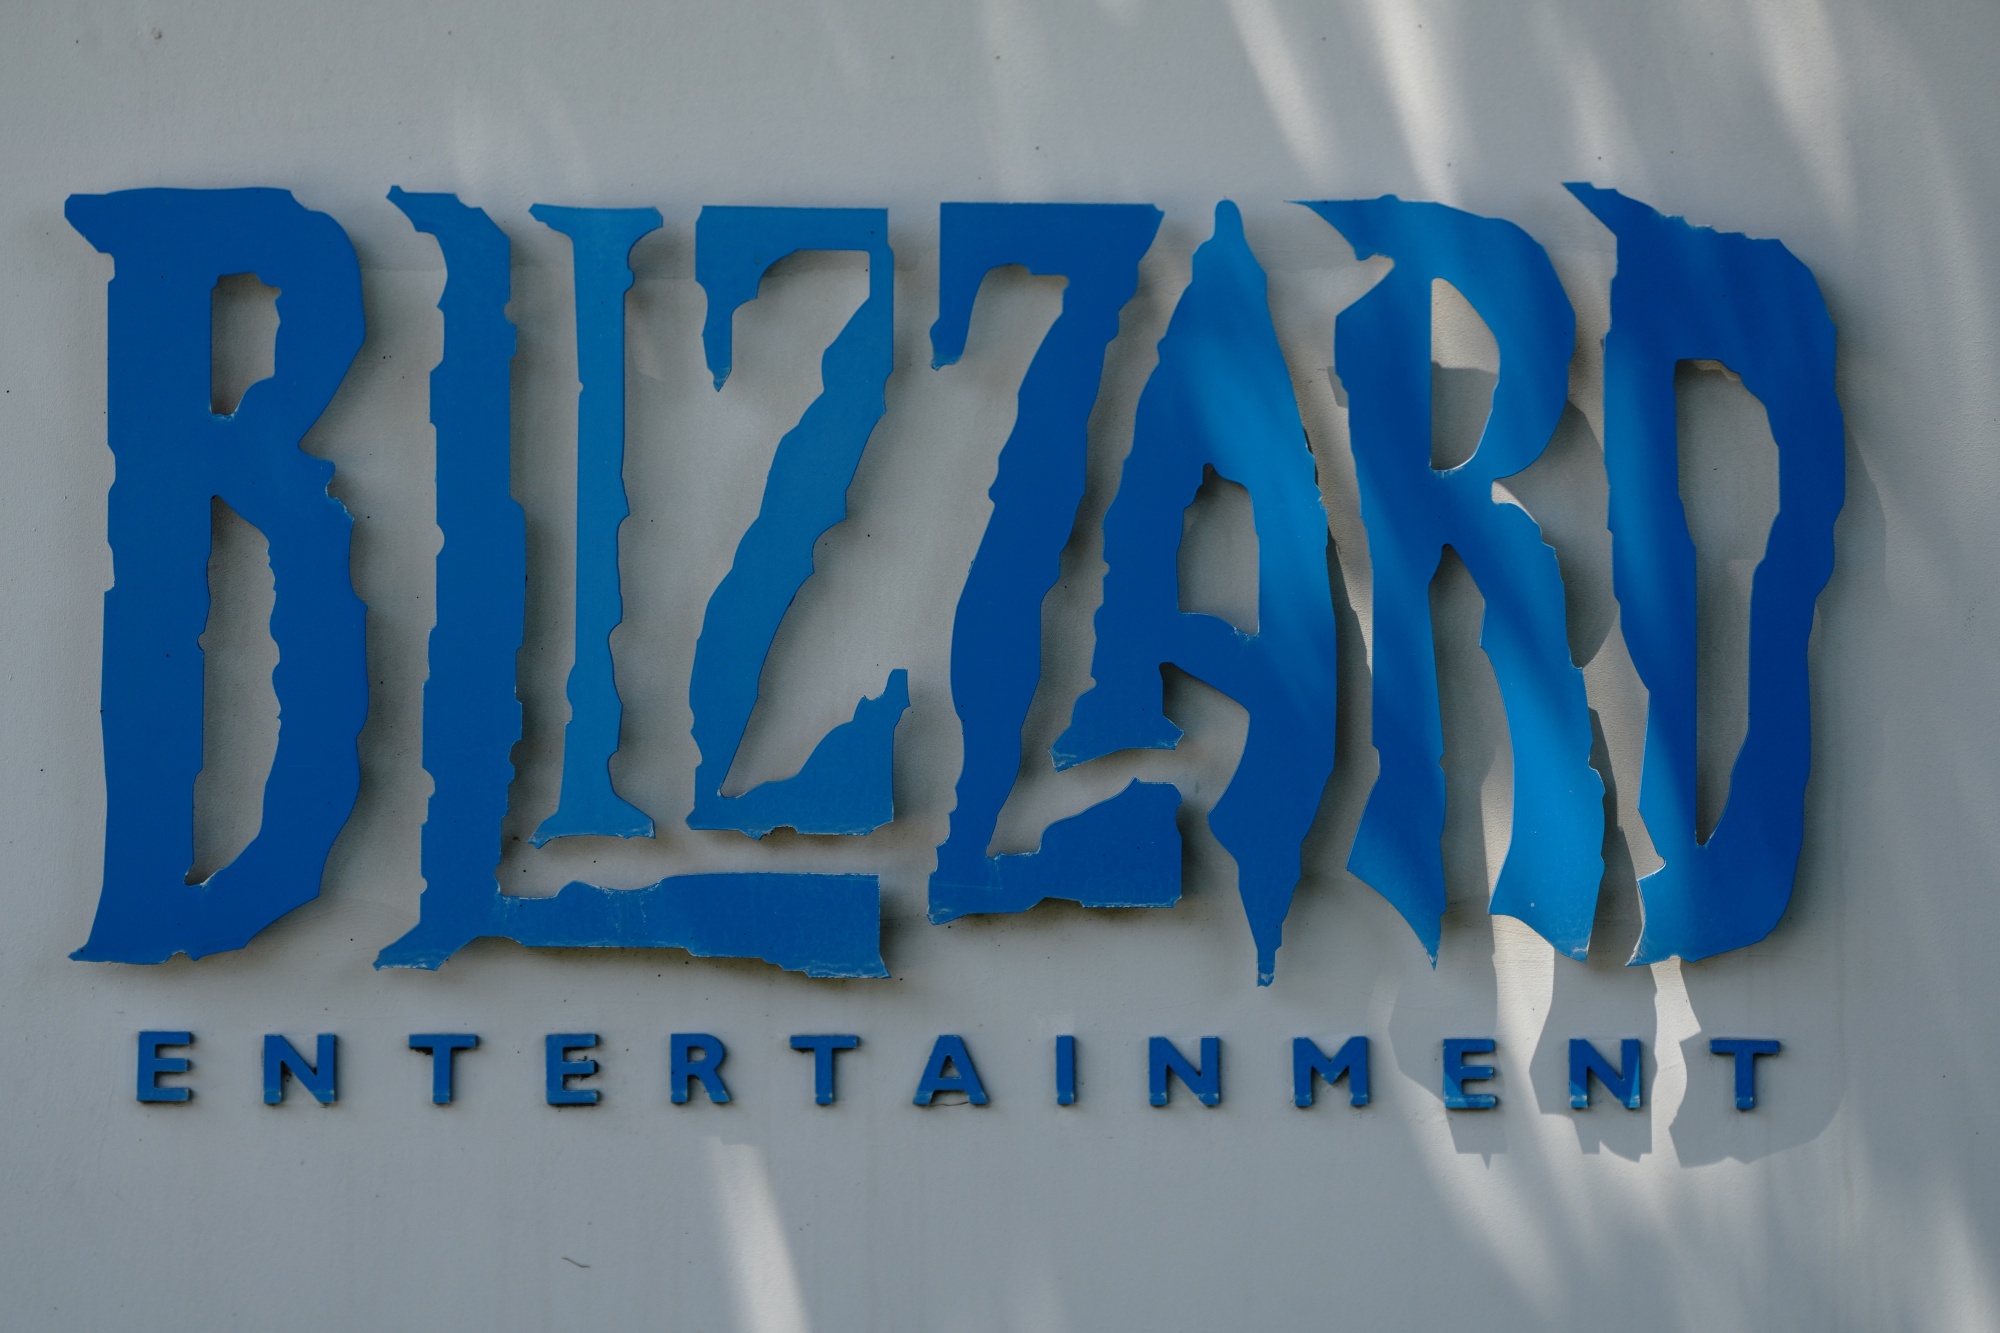 Activision Blizzard Stock Slides as Games are Delayed 